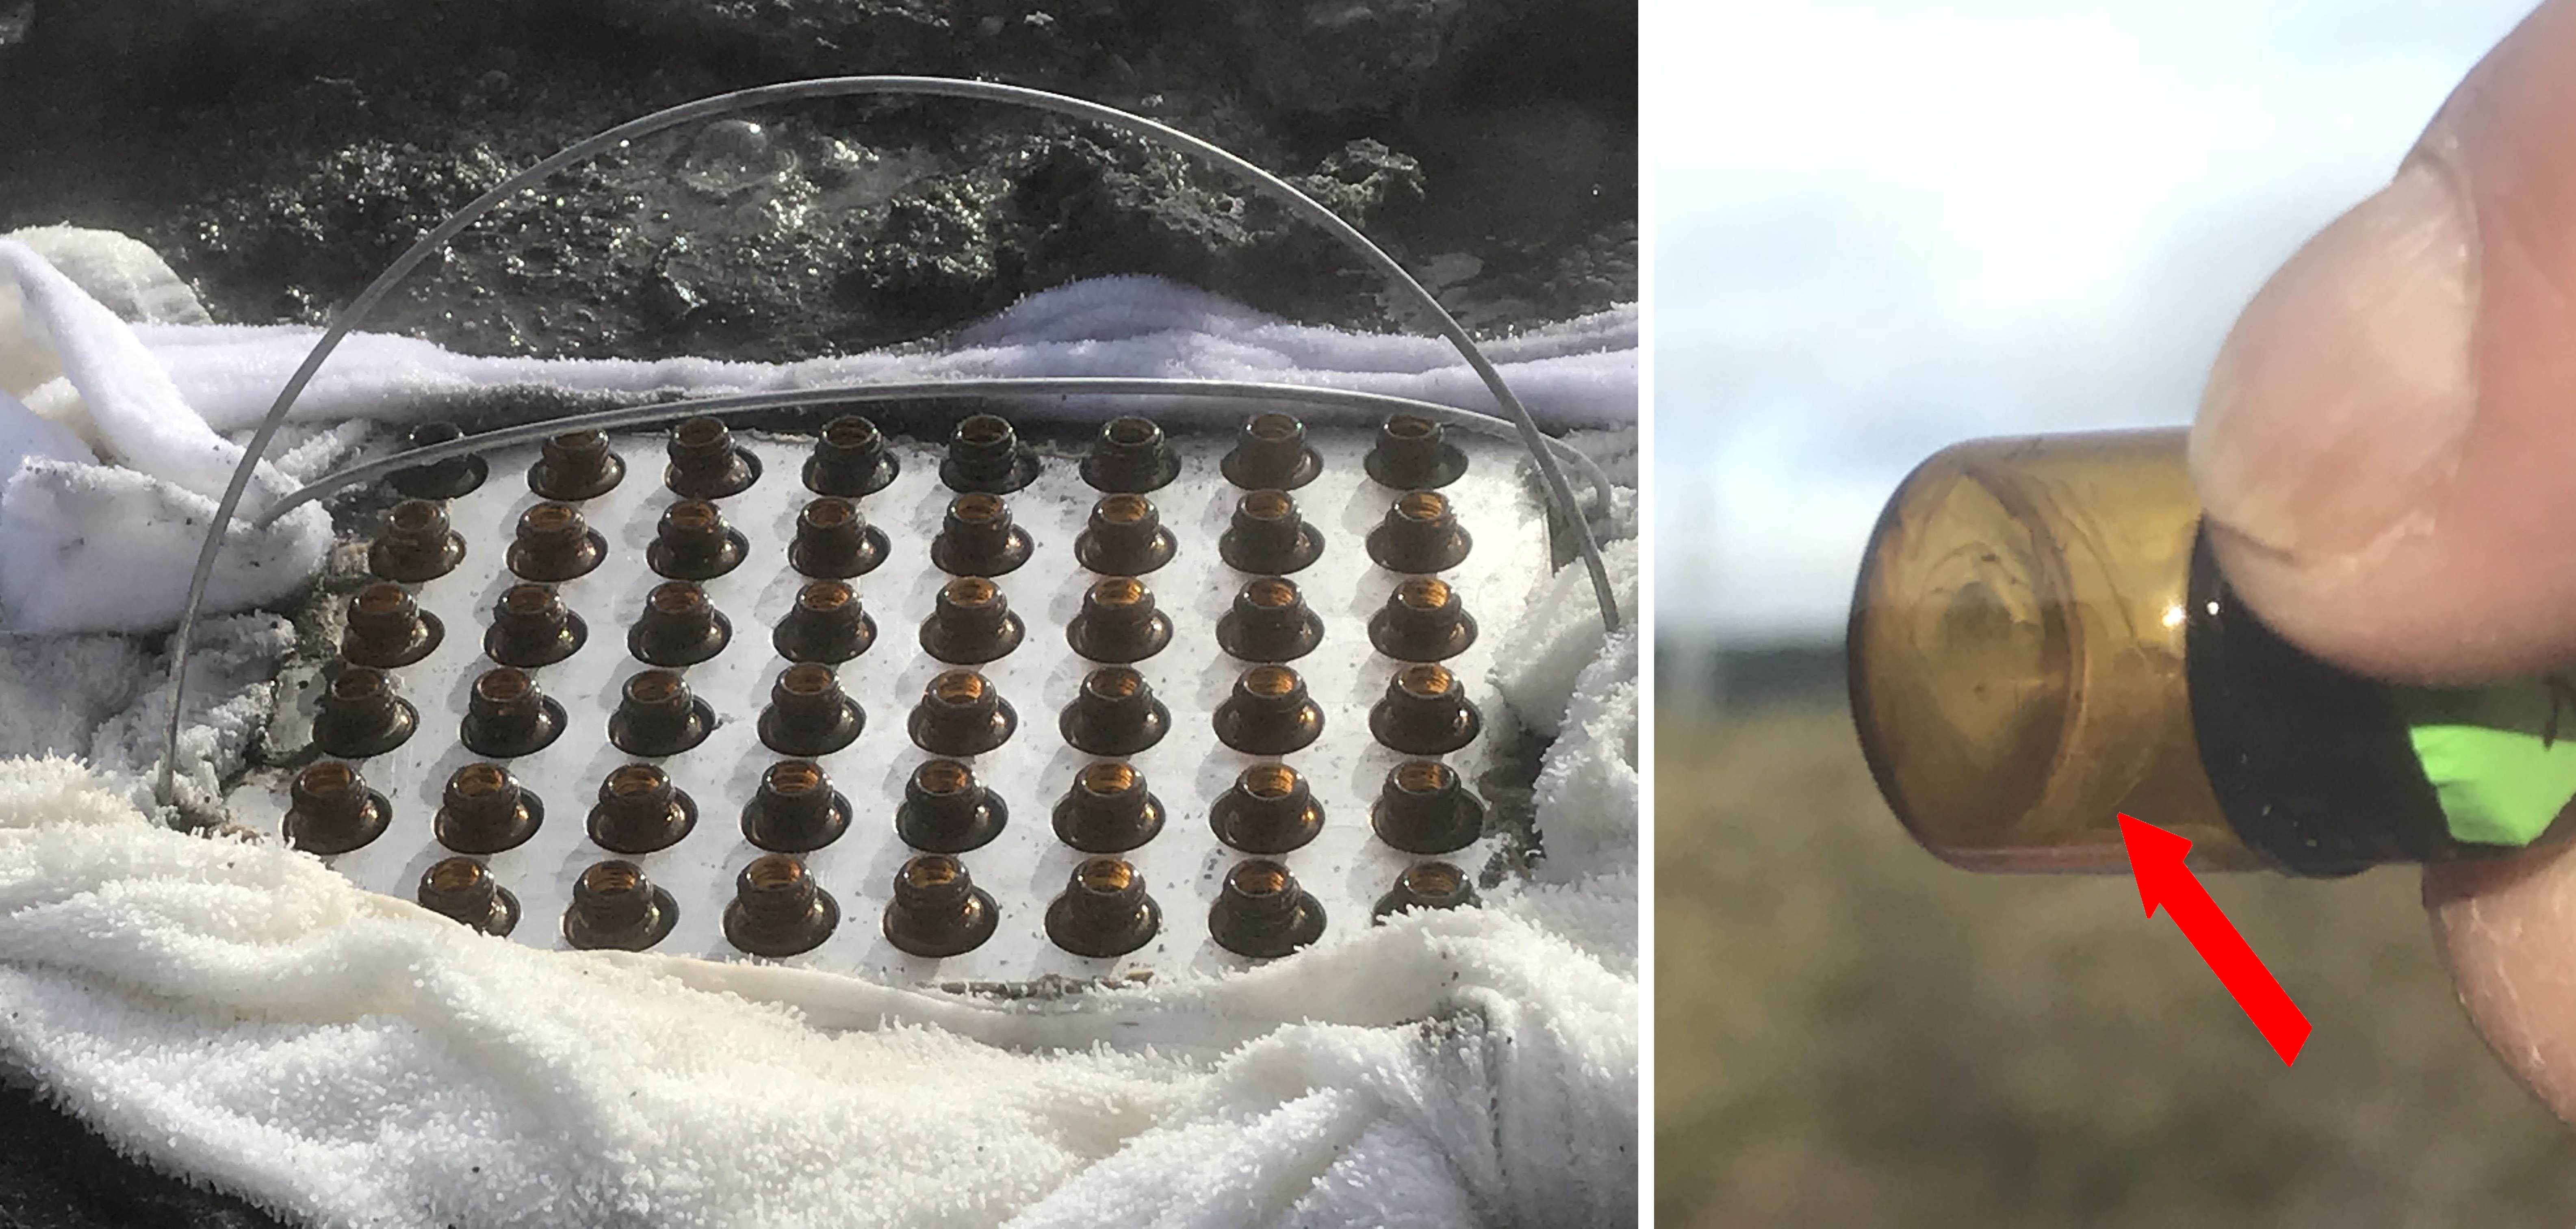 experimental vials in a plate in the hot spring